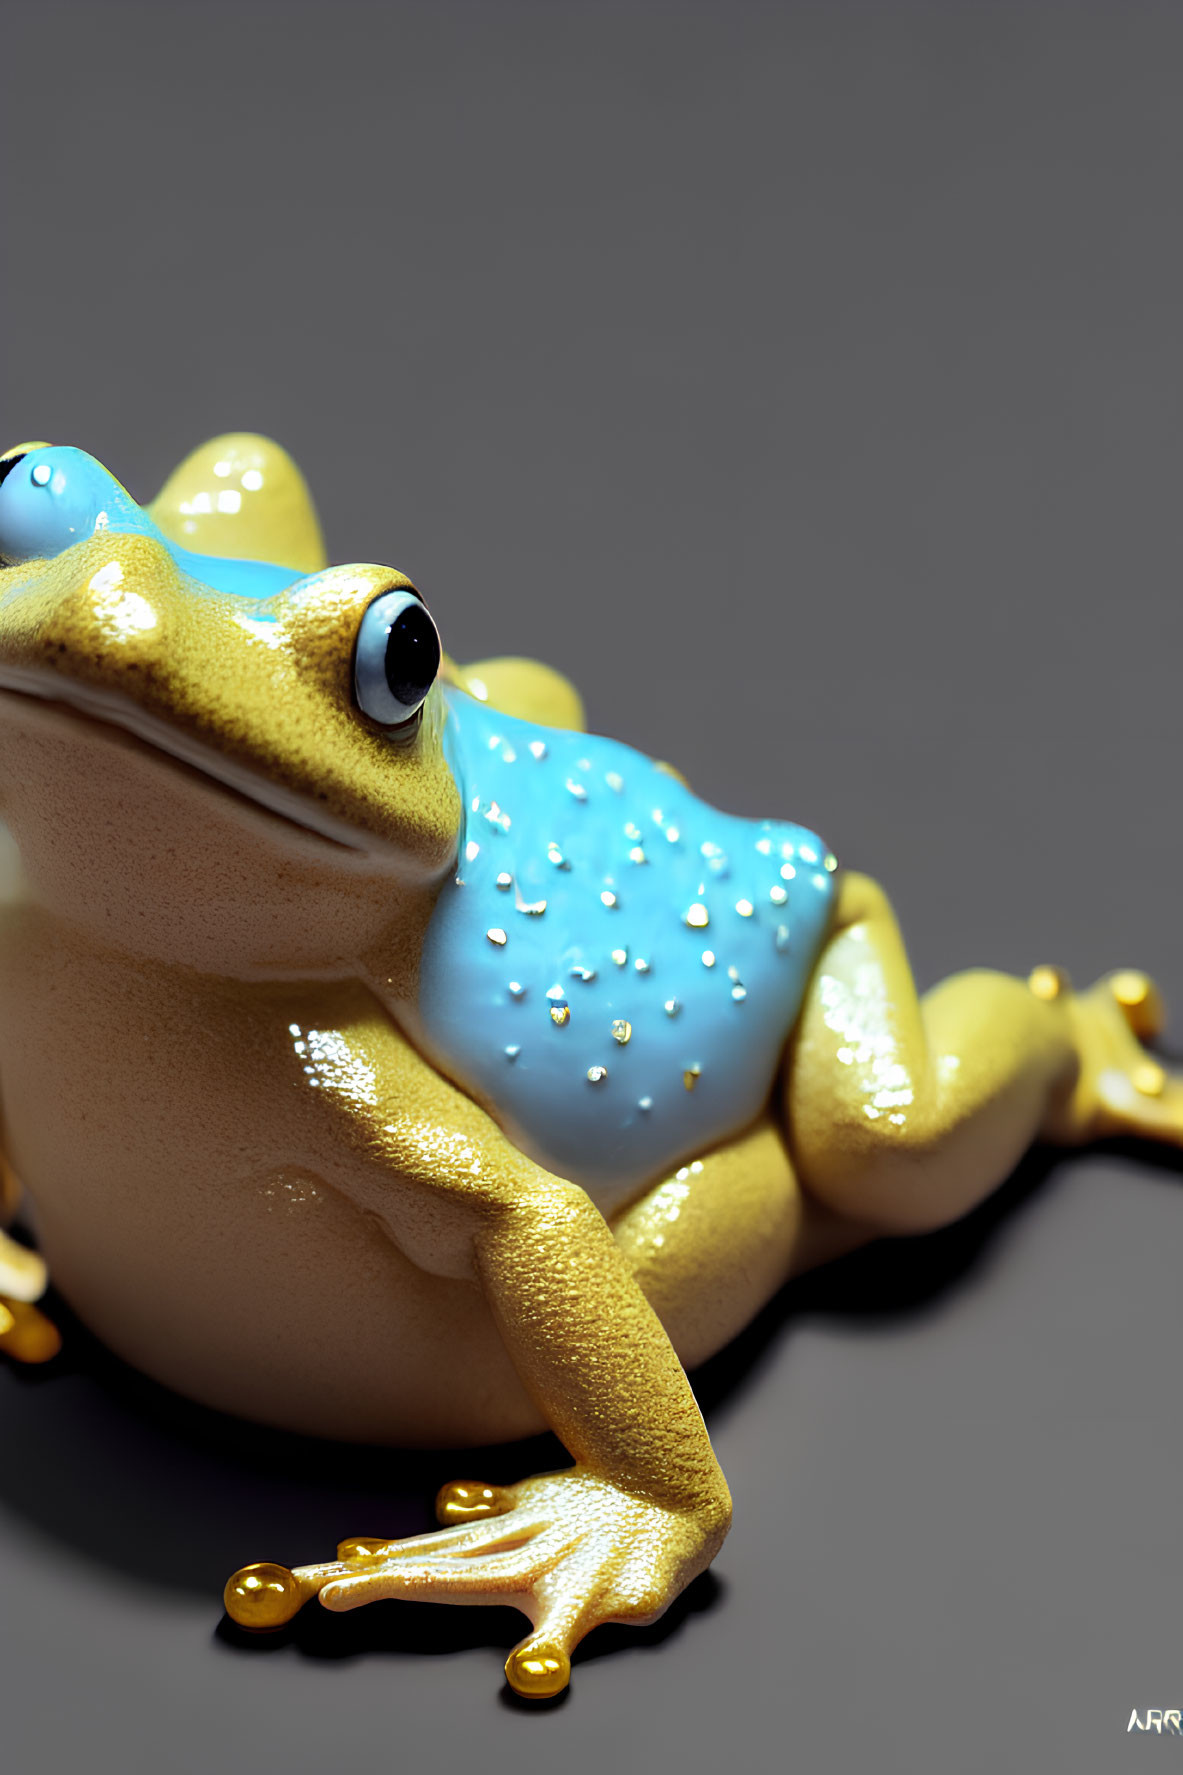 Glossy Yellow and Blue Frog with Realistic Eyes and Beaded Texture